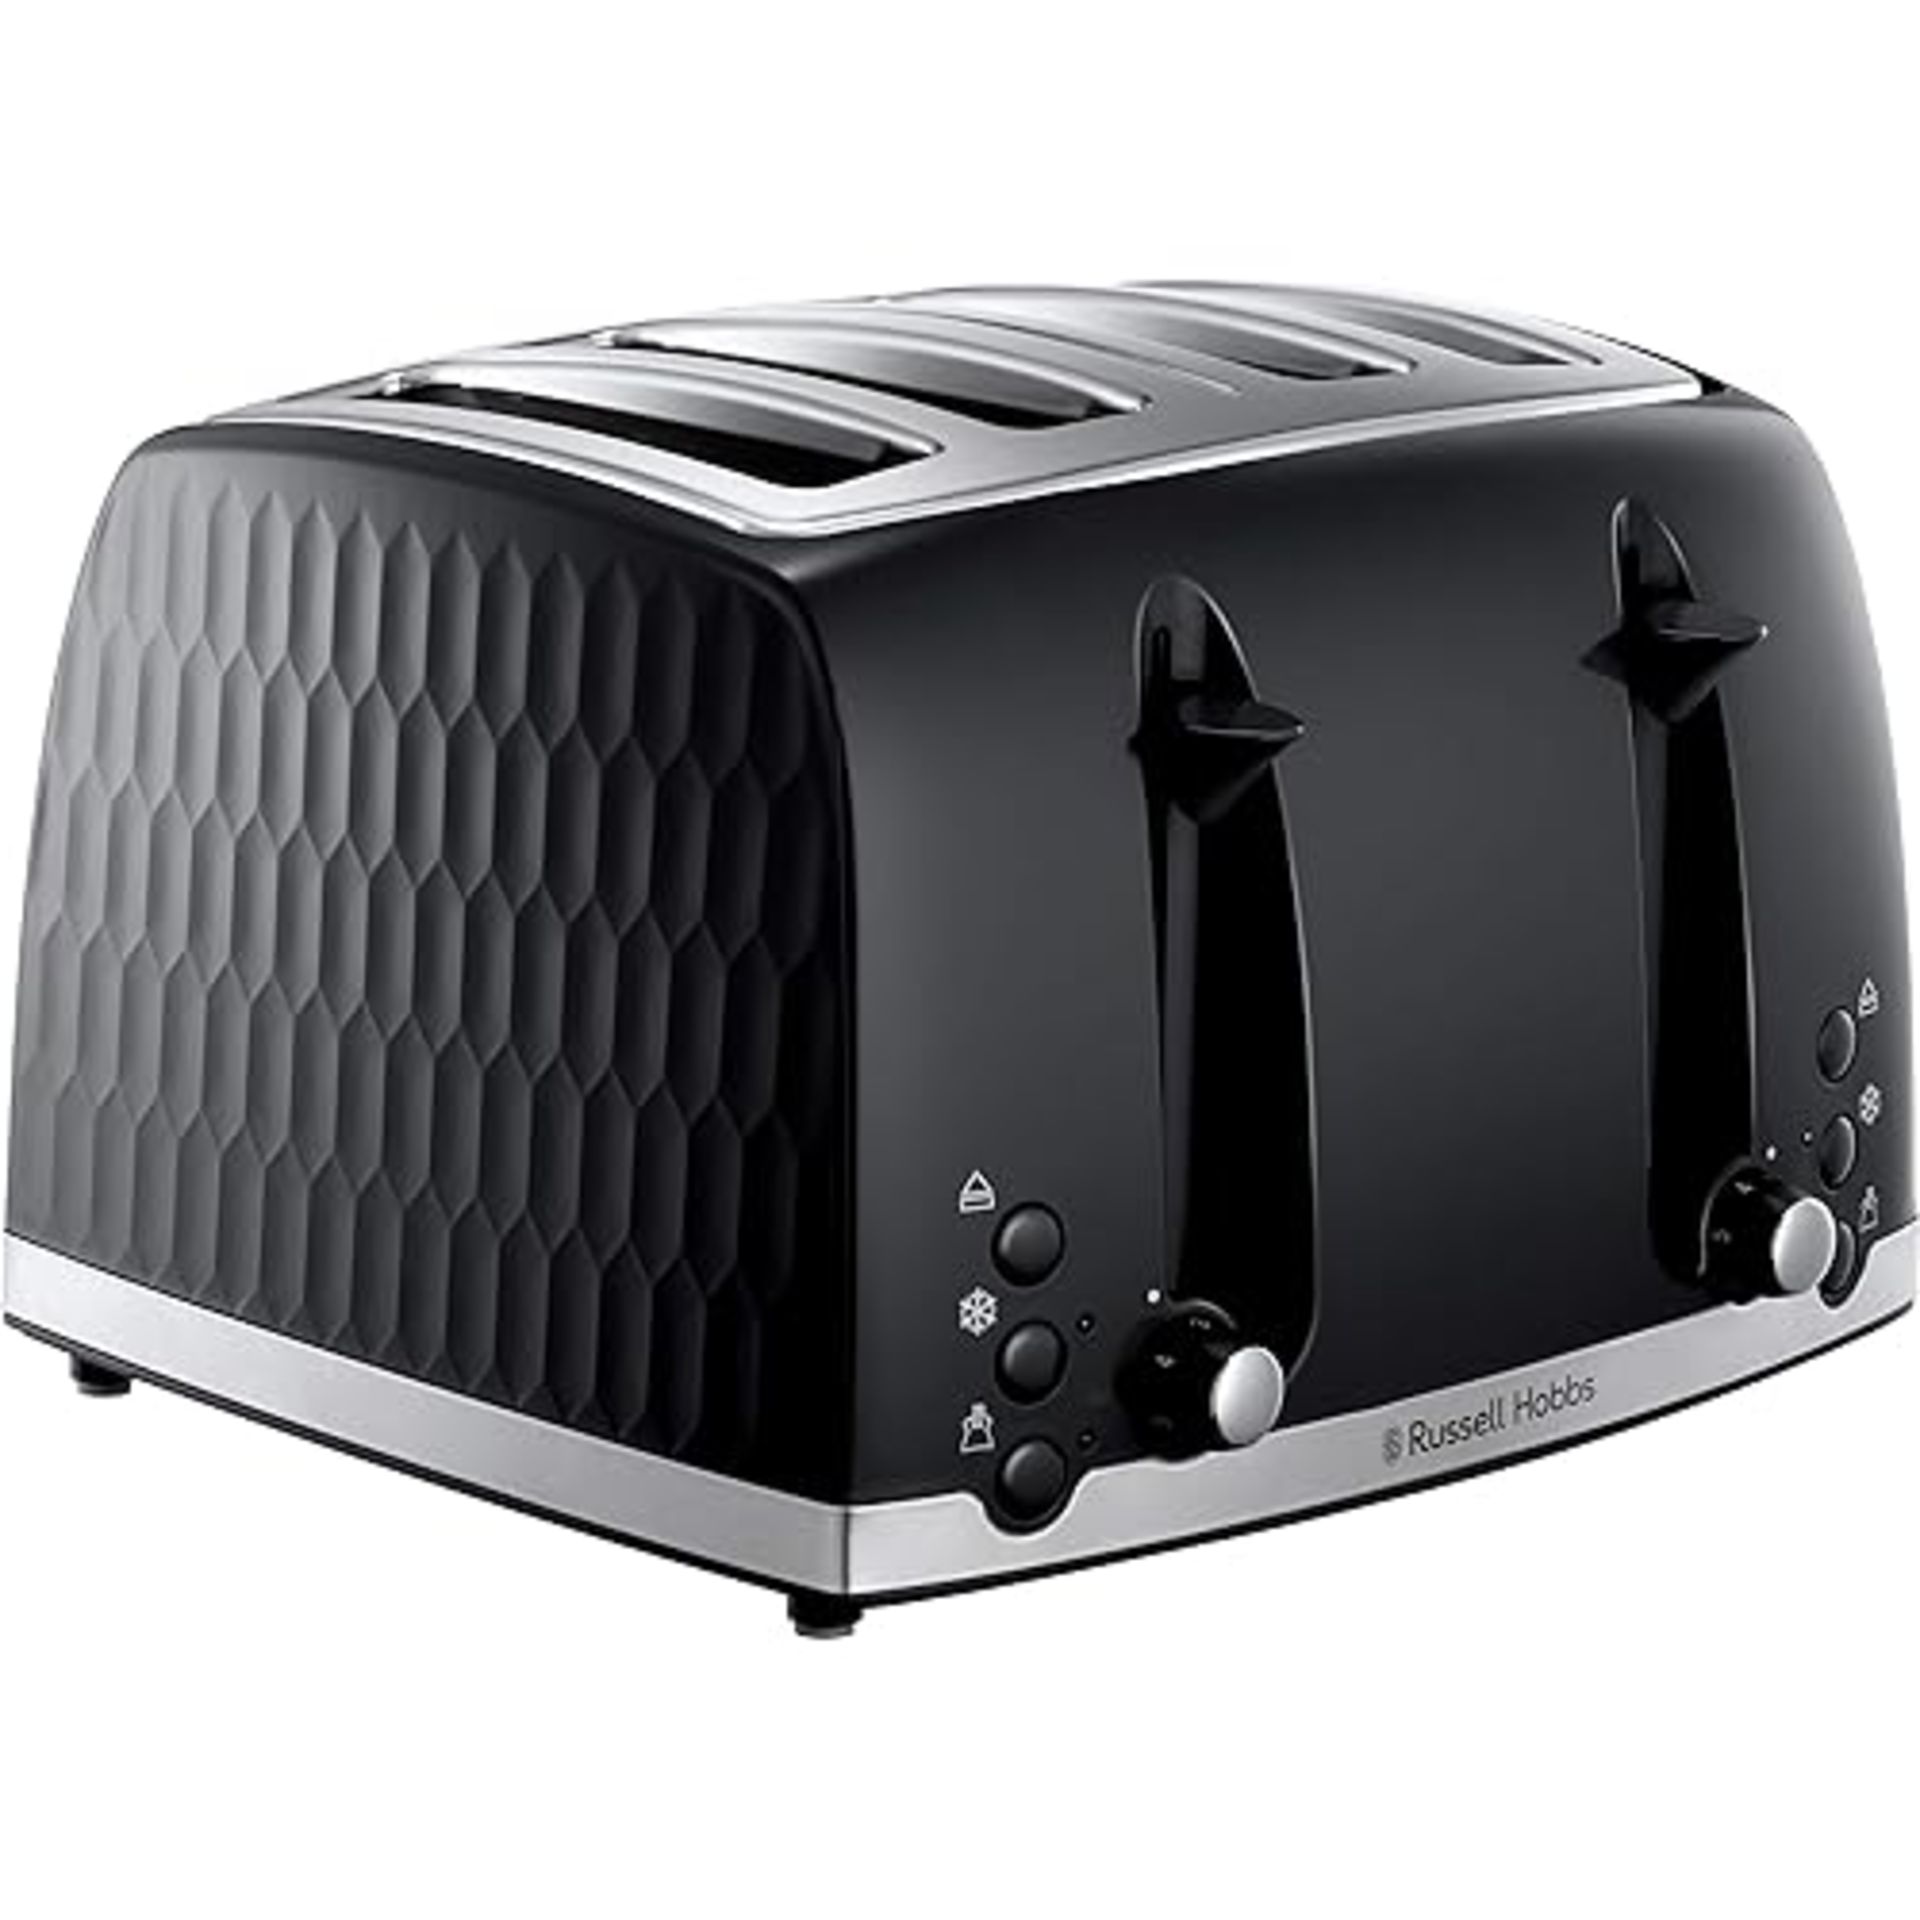 Russell Hobbs Honeycomb 4 Slice Toaster (Independent & Extra wide slots with high lift, 6 Browning 